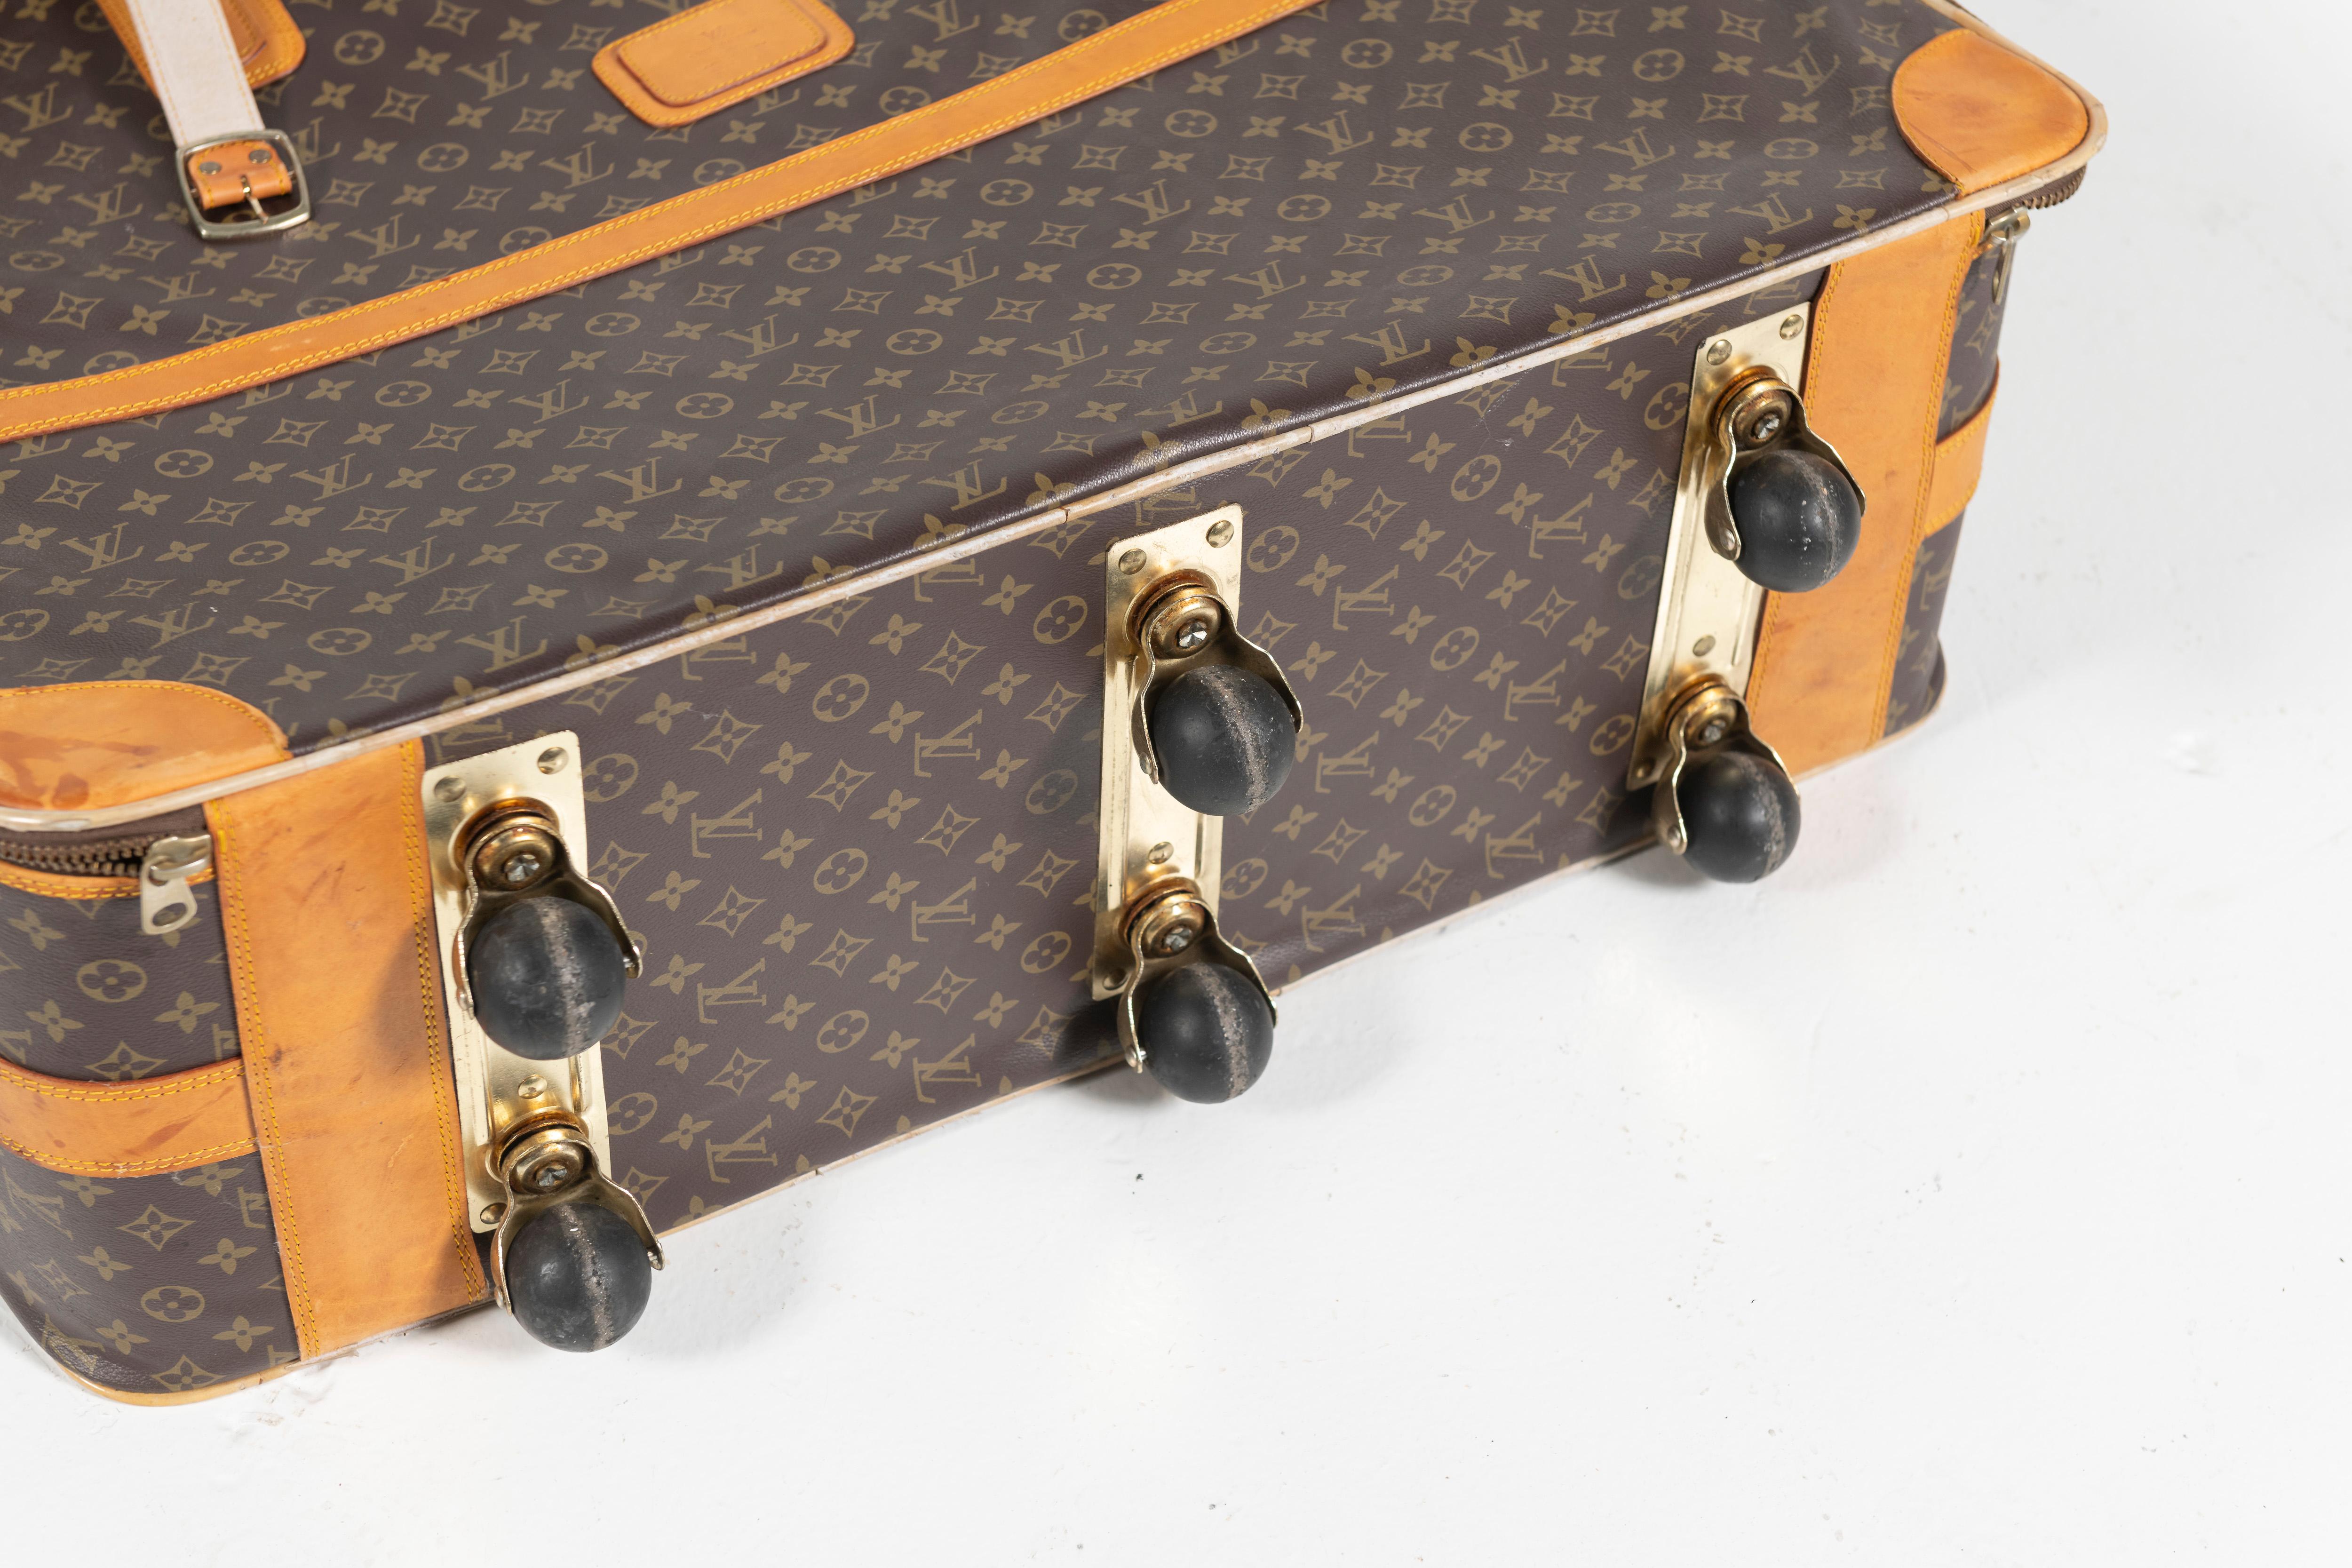 Vintage classic Louis Vuitton soft side suitcase with leather trims, zipper closure and wheels for easy transport. Open interior for you to pack as you like. Large-sized. 